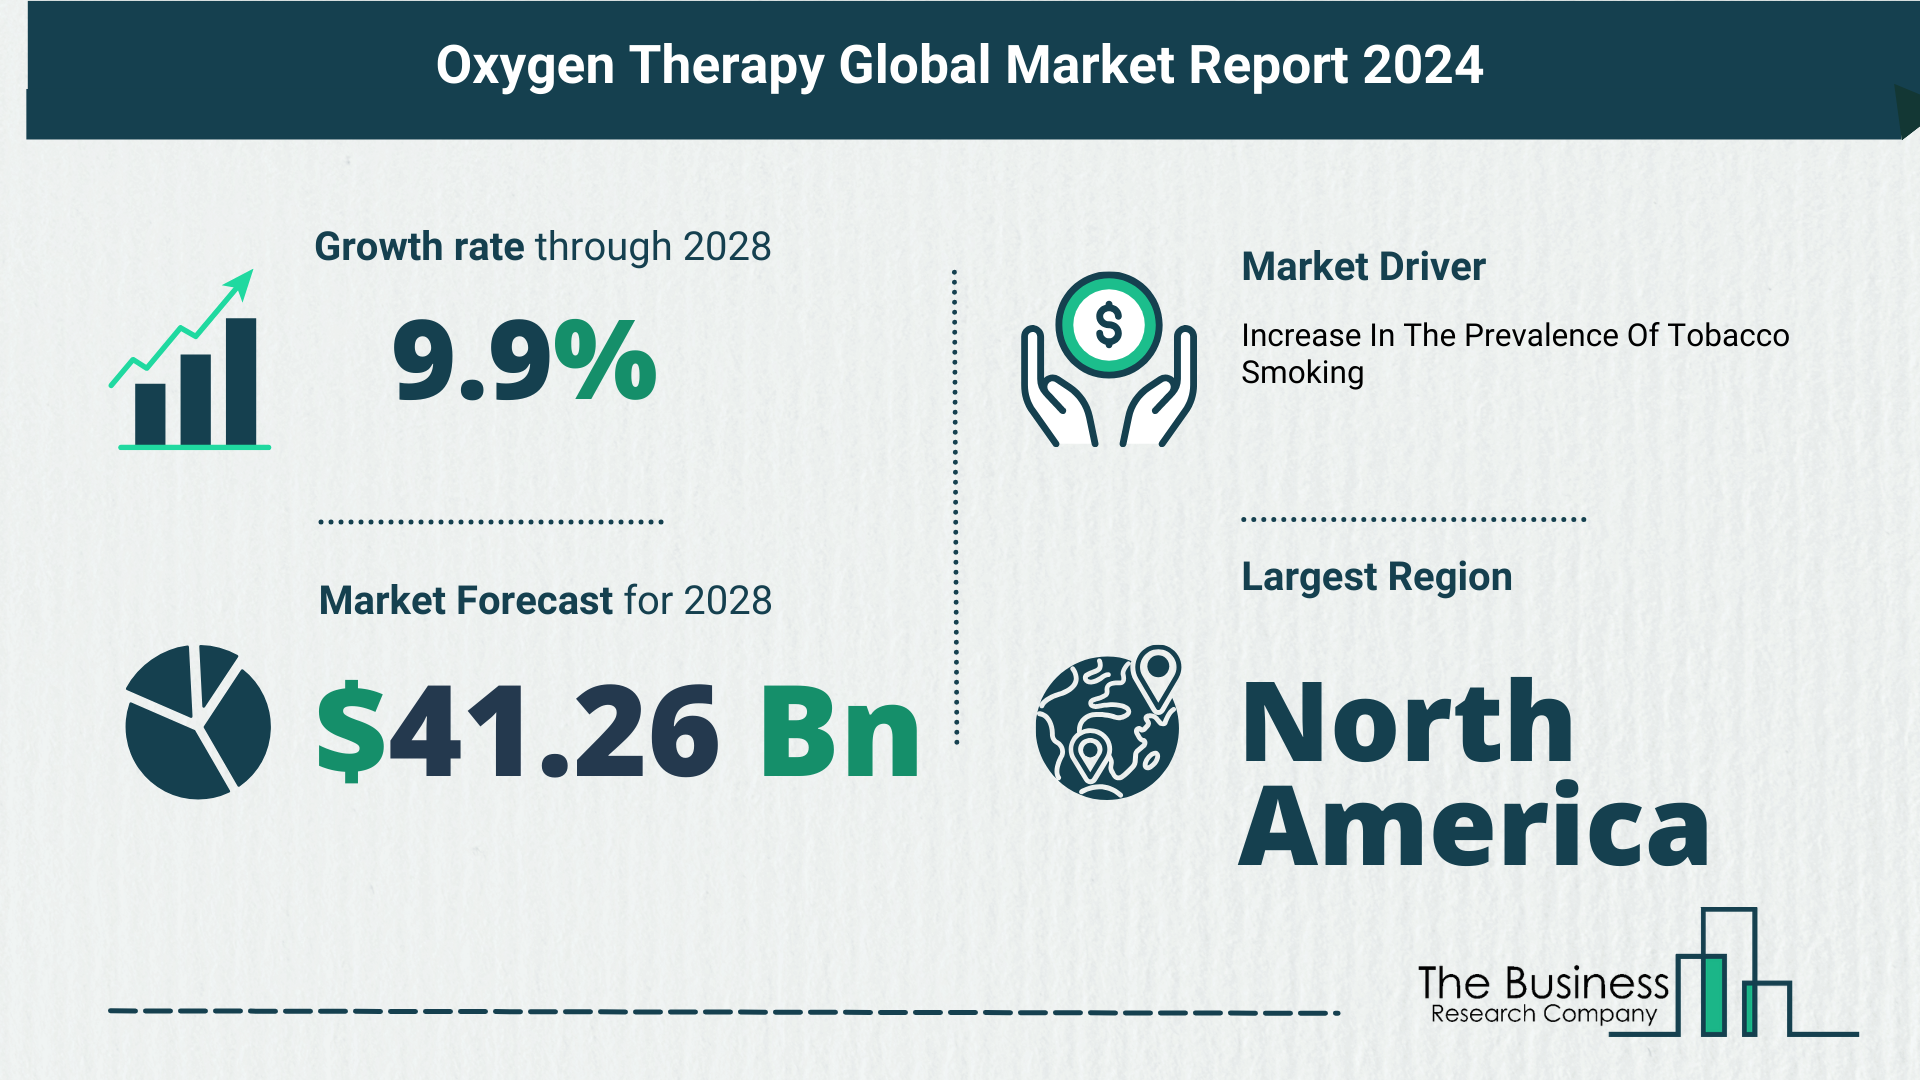 Global Oxygen Therapy Market